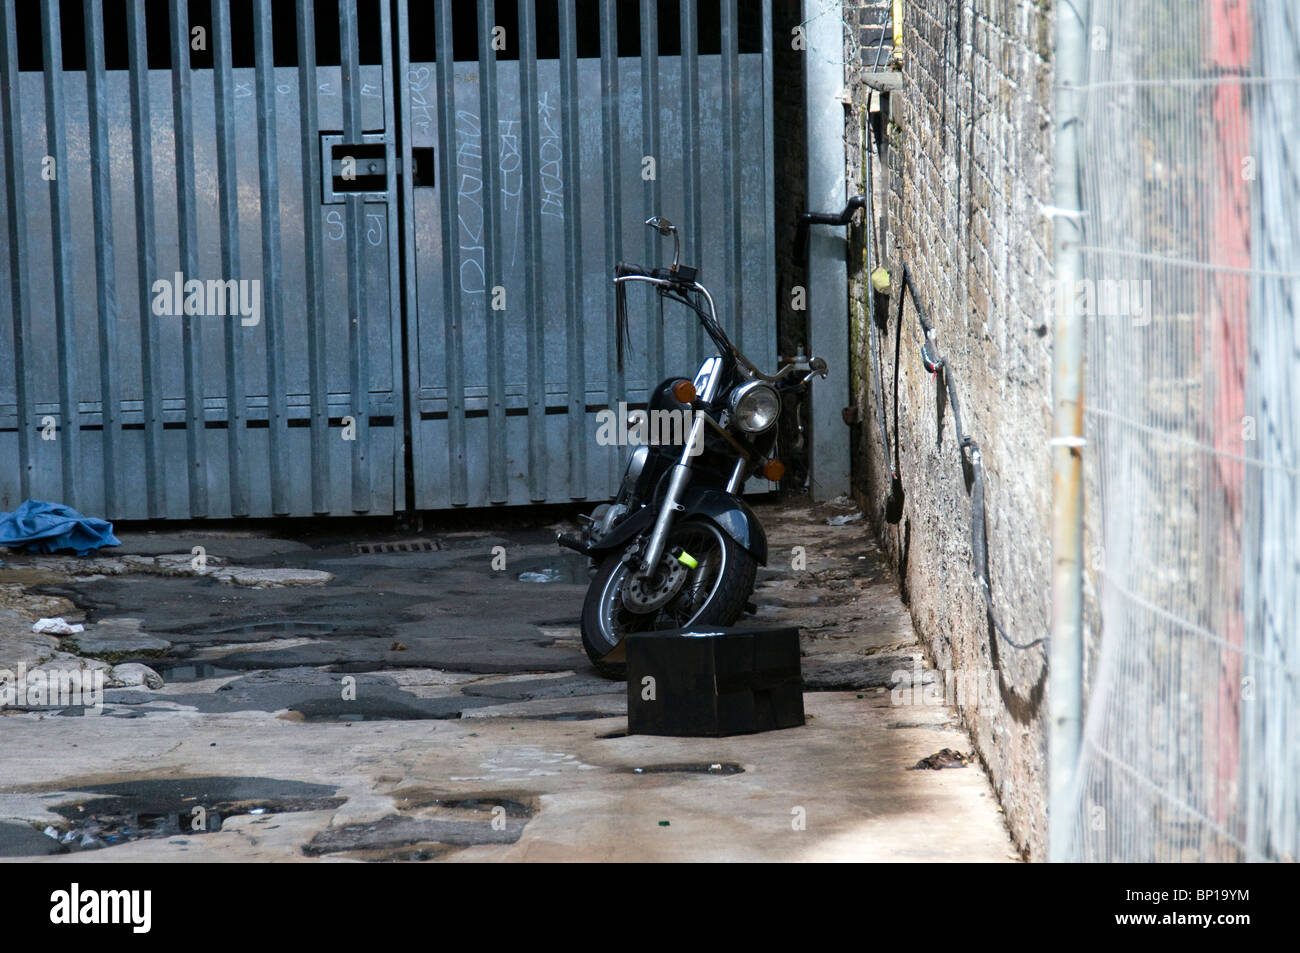 Motorbike parked down an alleyway Stock Photo